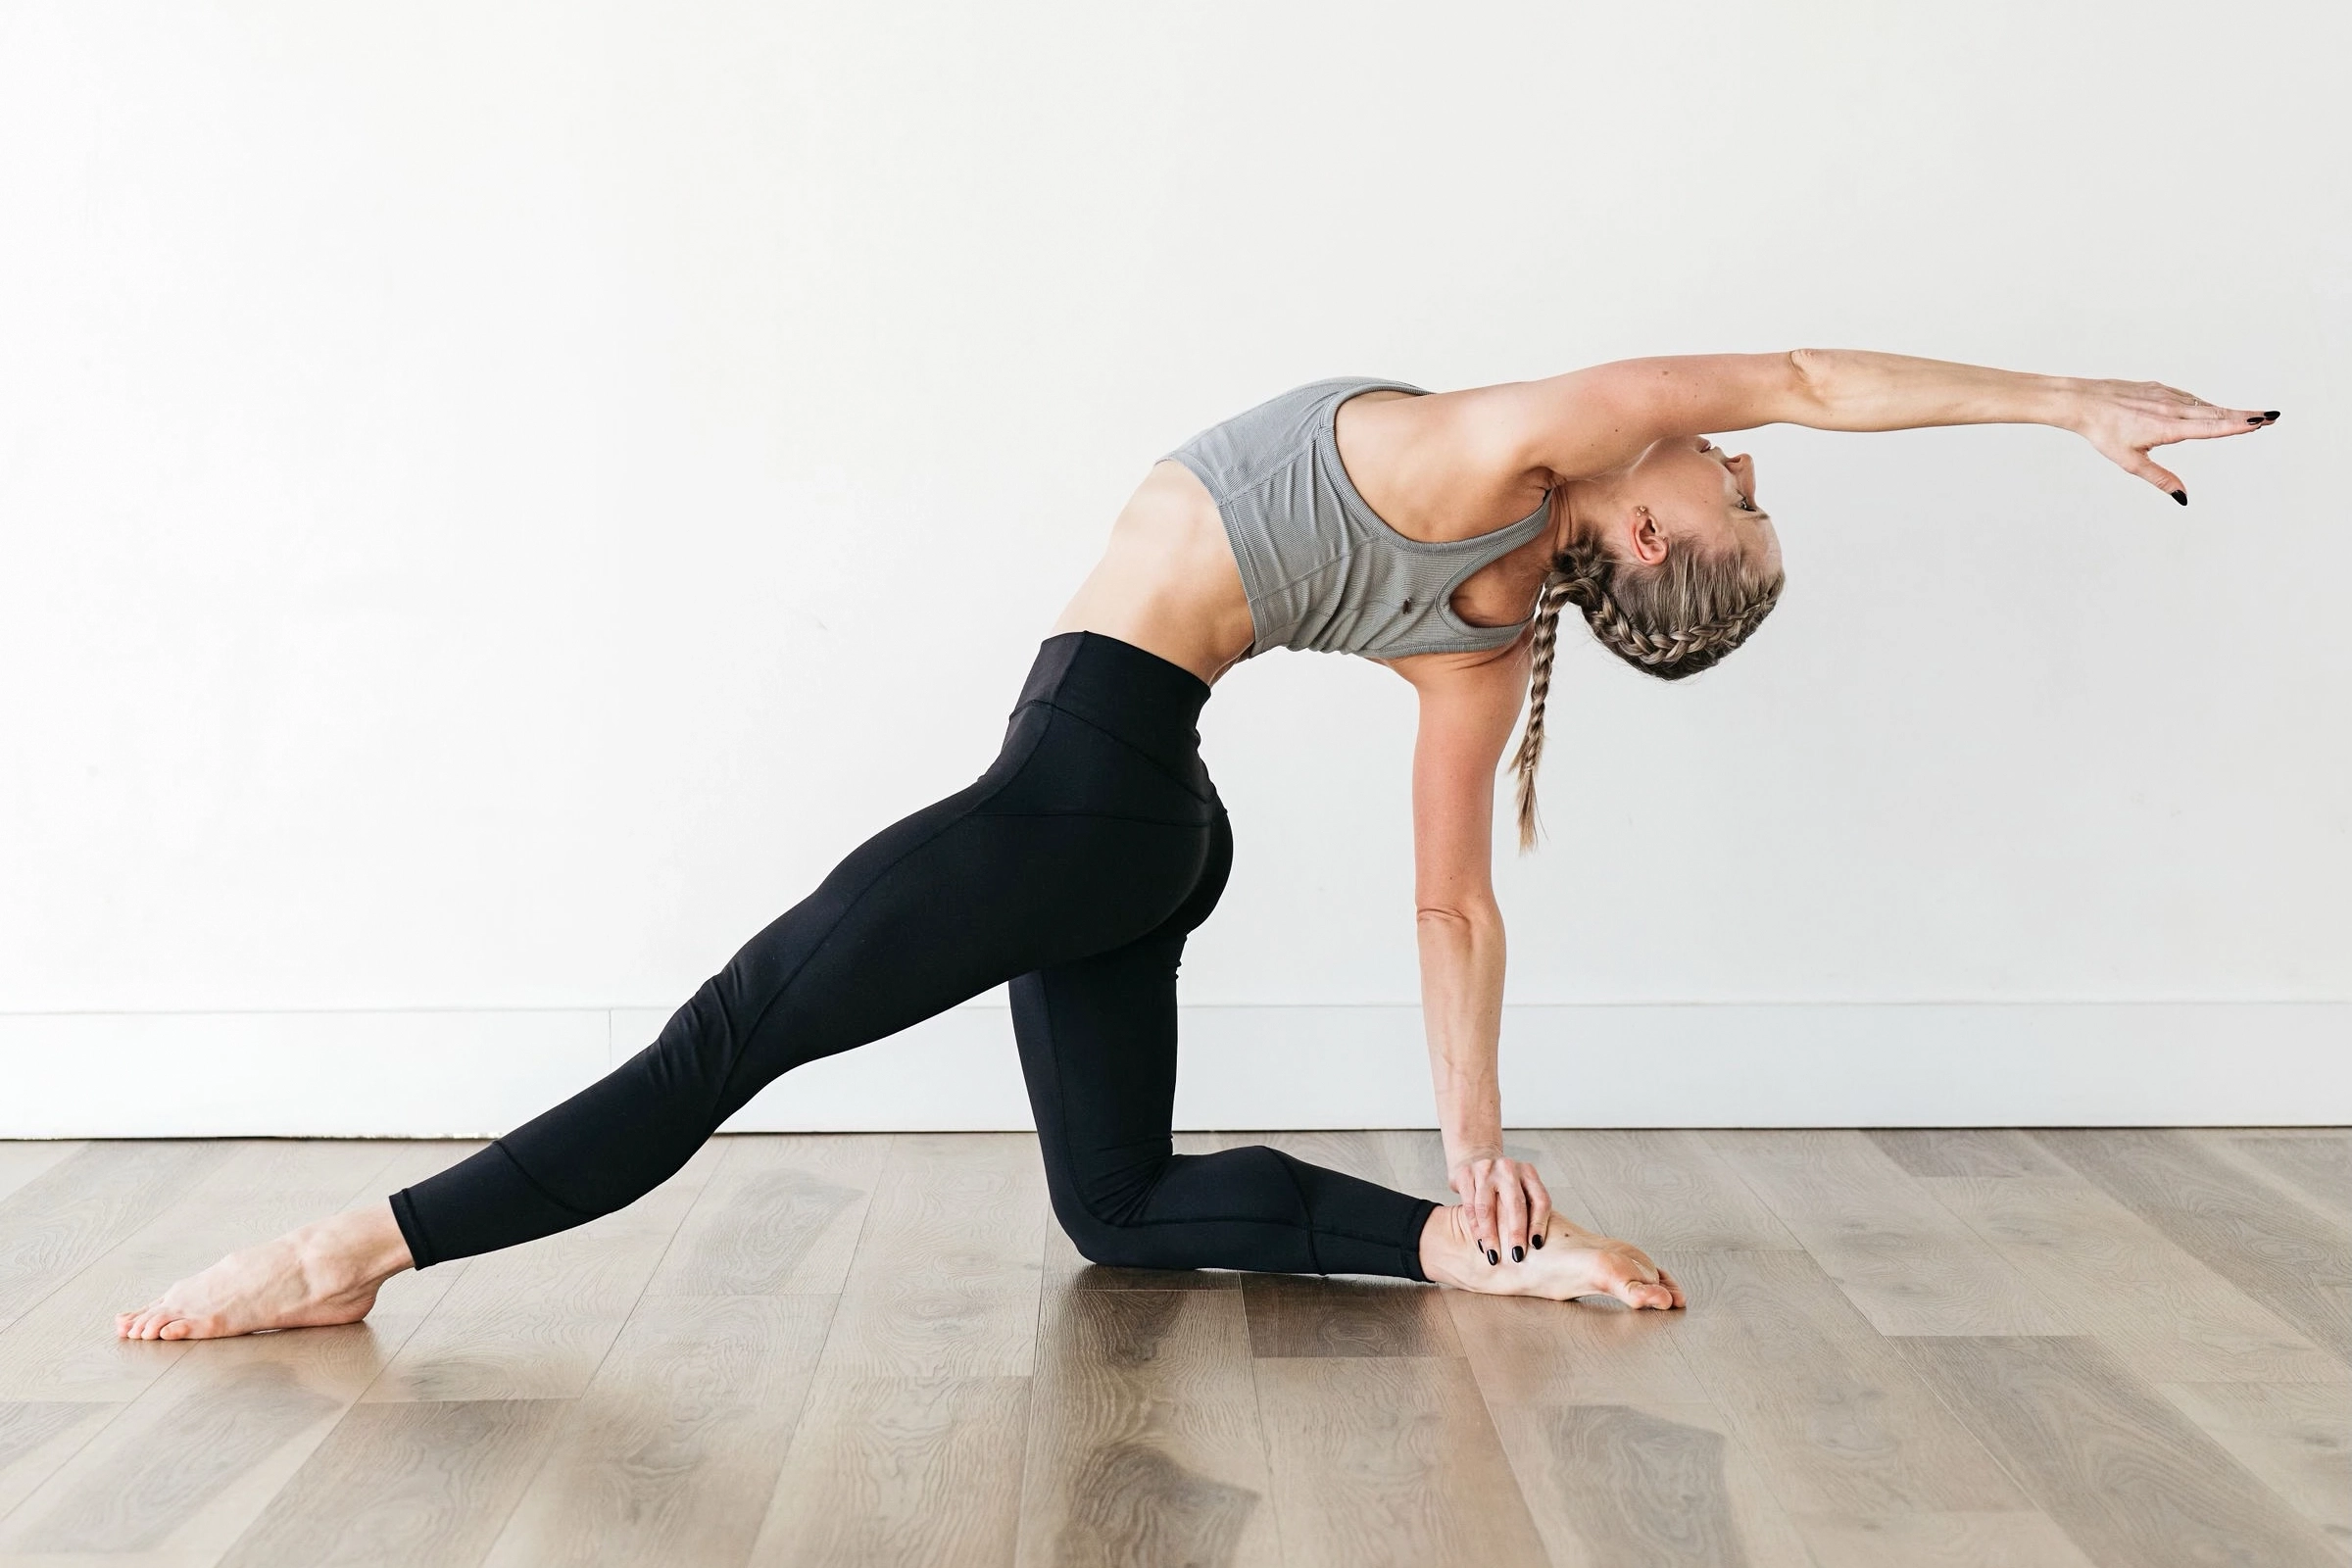 Leigh Anne Albrechta wears a gray sports bra and black leggings and does a yoga pose on a wooden floor. She balances on her right know and extends her left leg out while holding her right heel with her right hand and reaching back with her left arm and upper body.